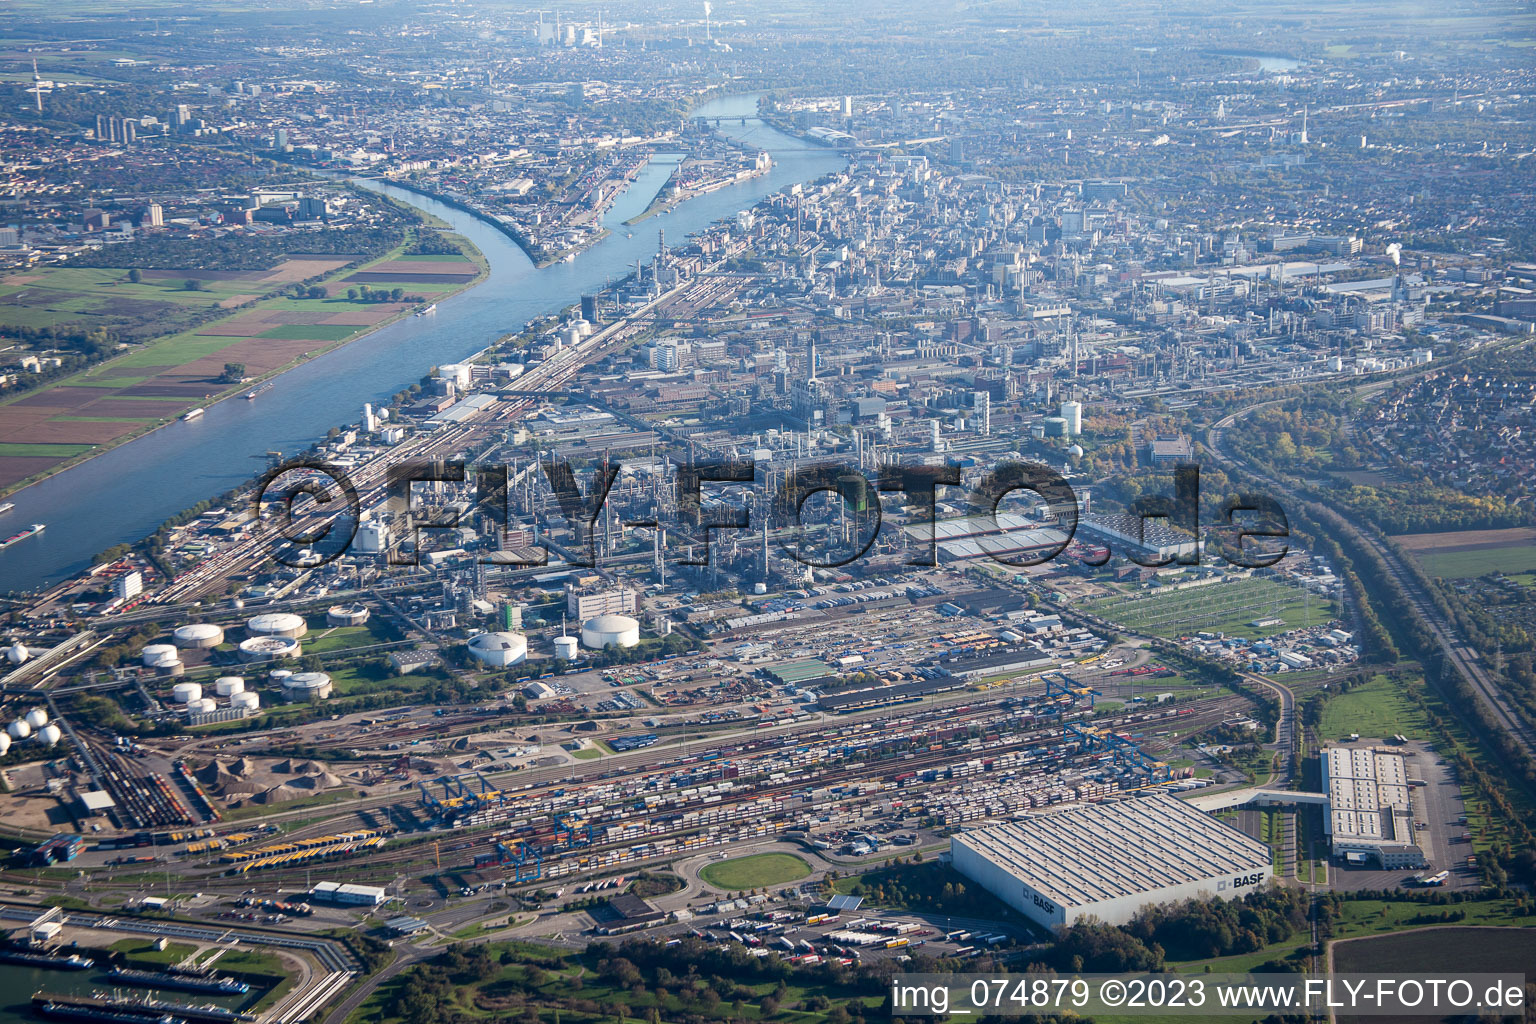 Aerial photograpy of From the north in the district BASF in Ludwigshafen am Rhein in the state Rhineland-Palatinate, Germany